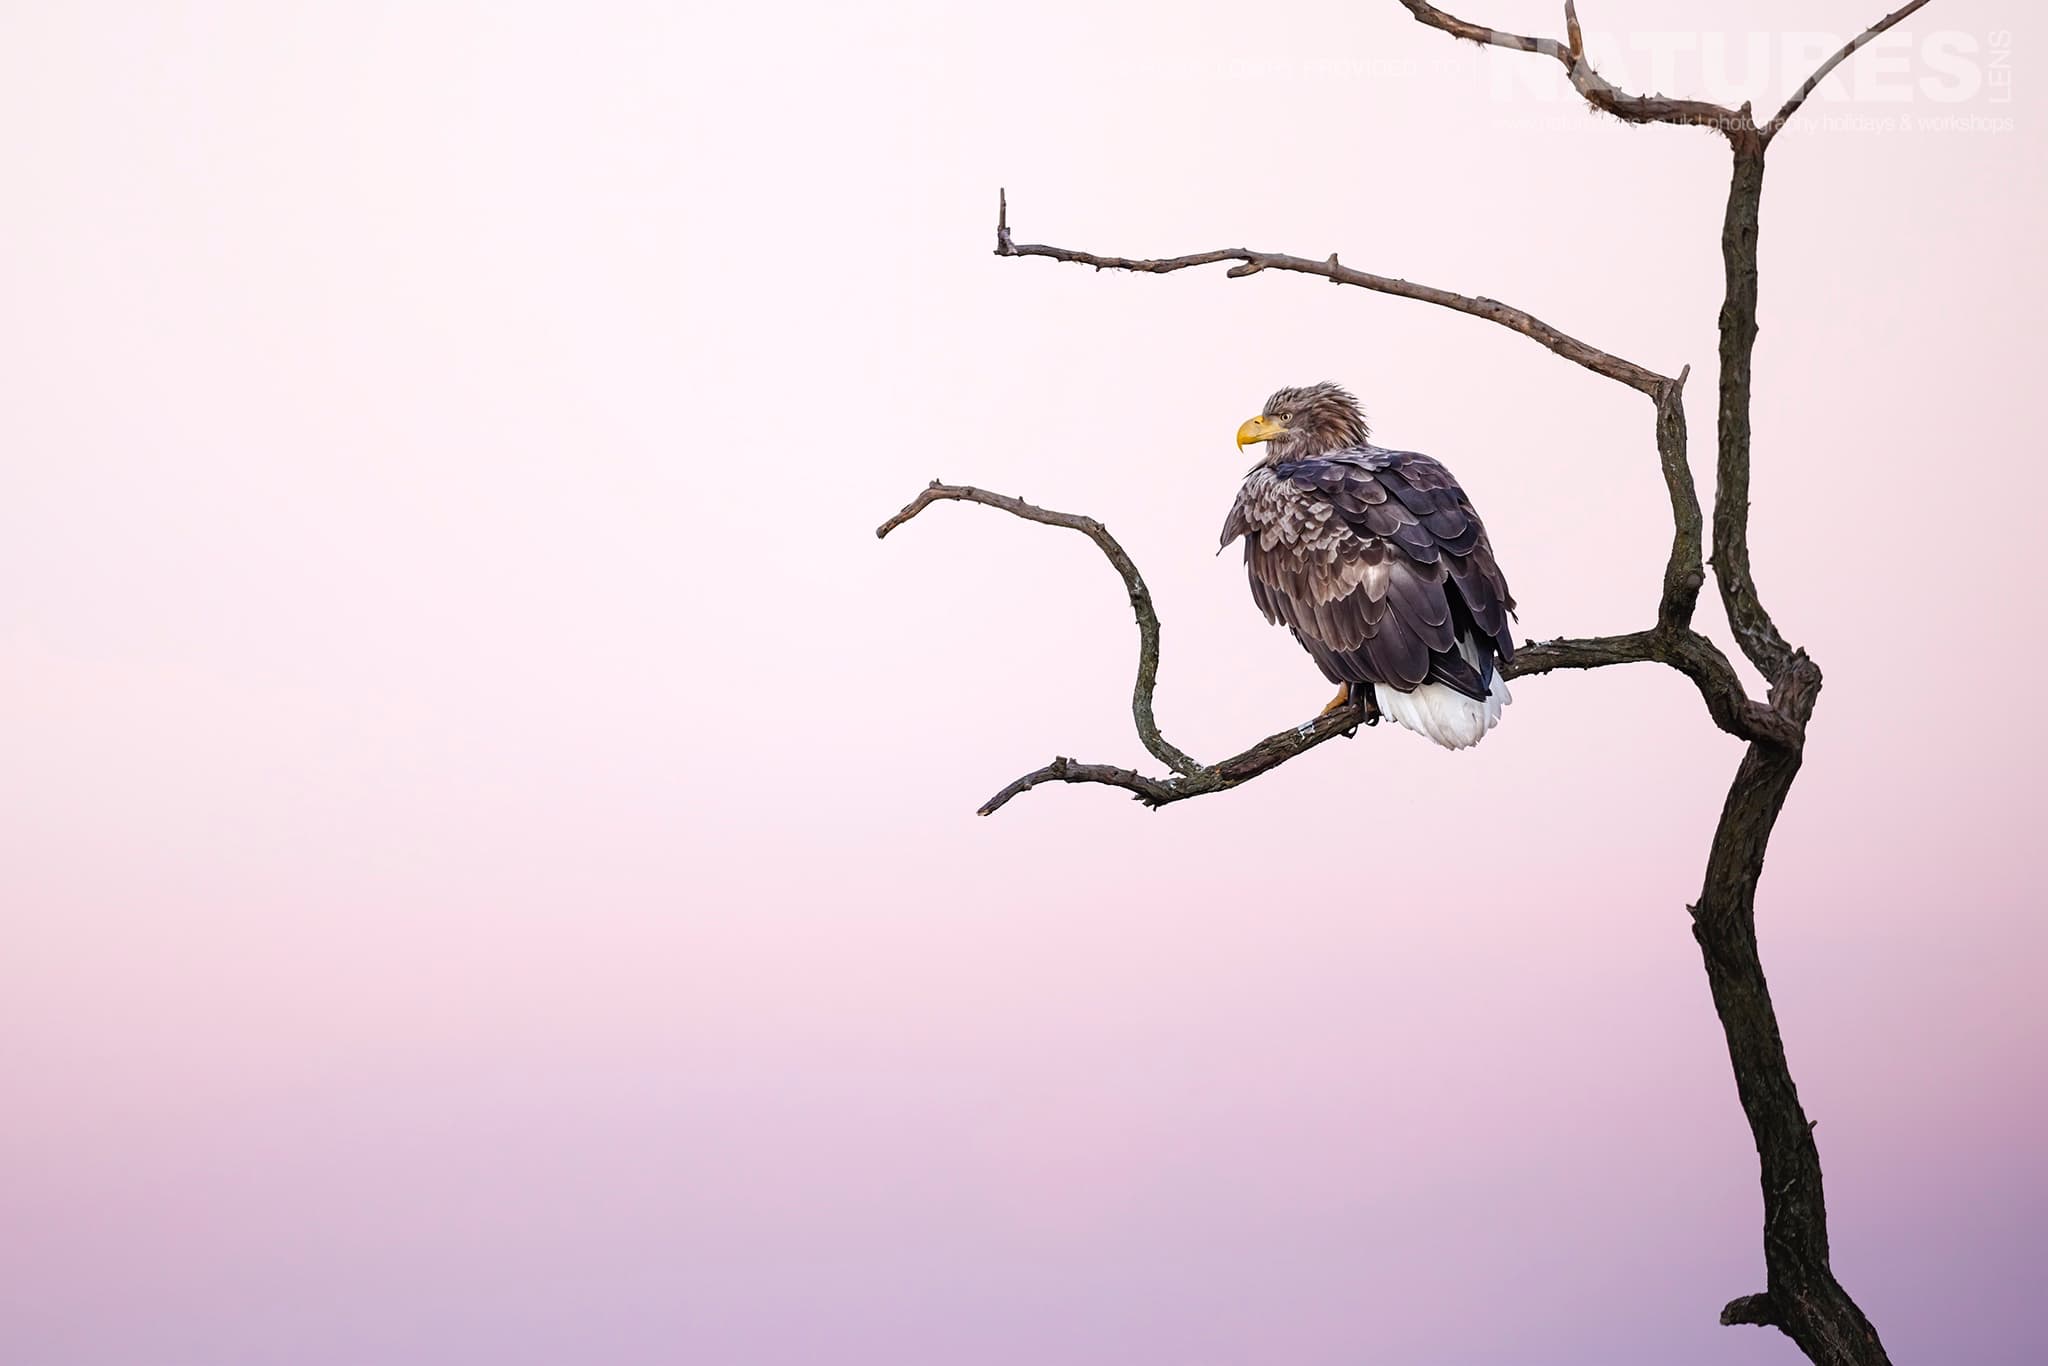 A White Tailed Eagle Perched Against A Pink Sky The Largest Bird Species Found Amongst The Wildlife Of The Hortobágy National Park In Hungary